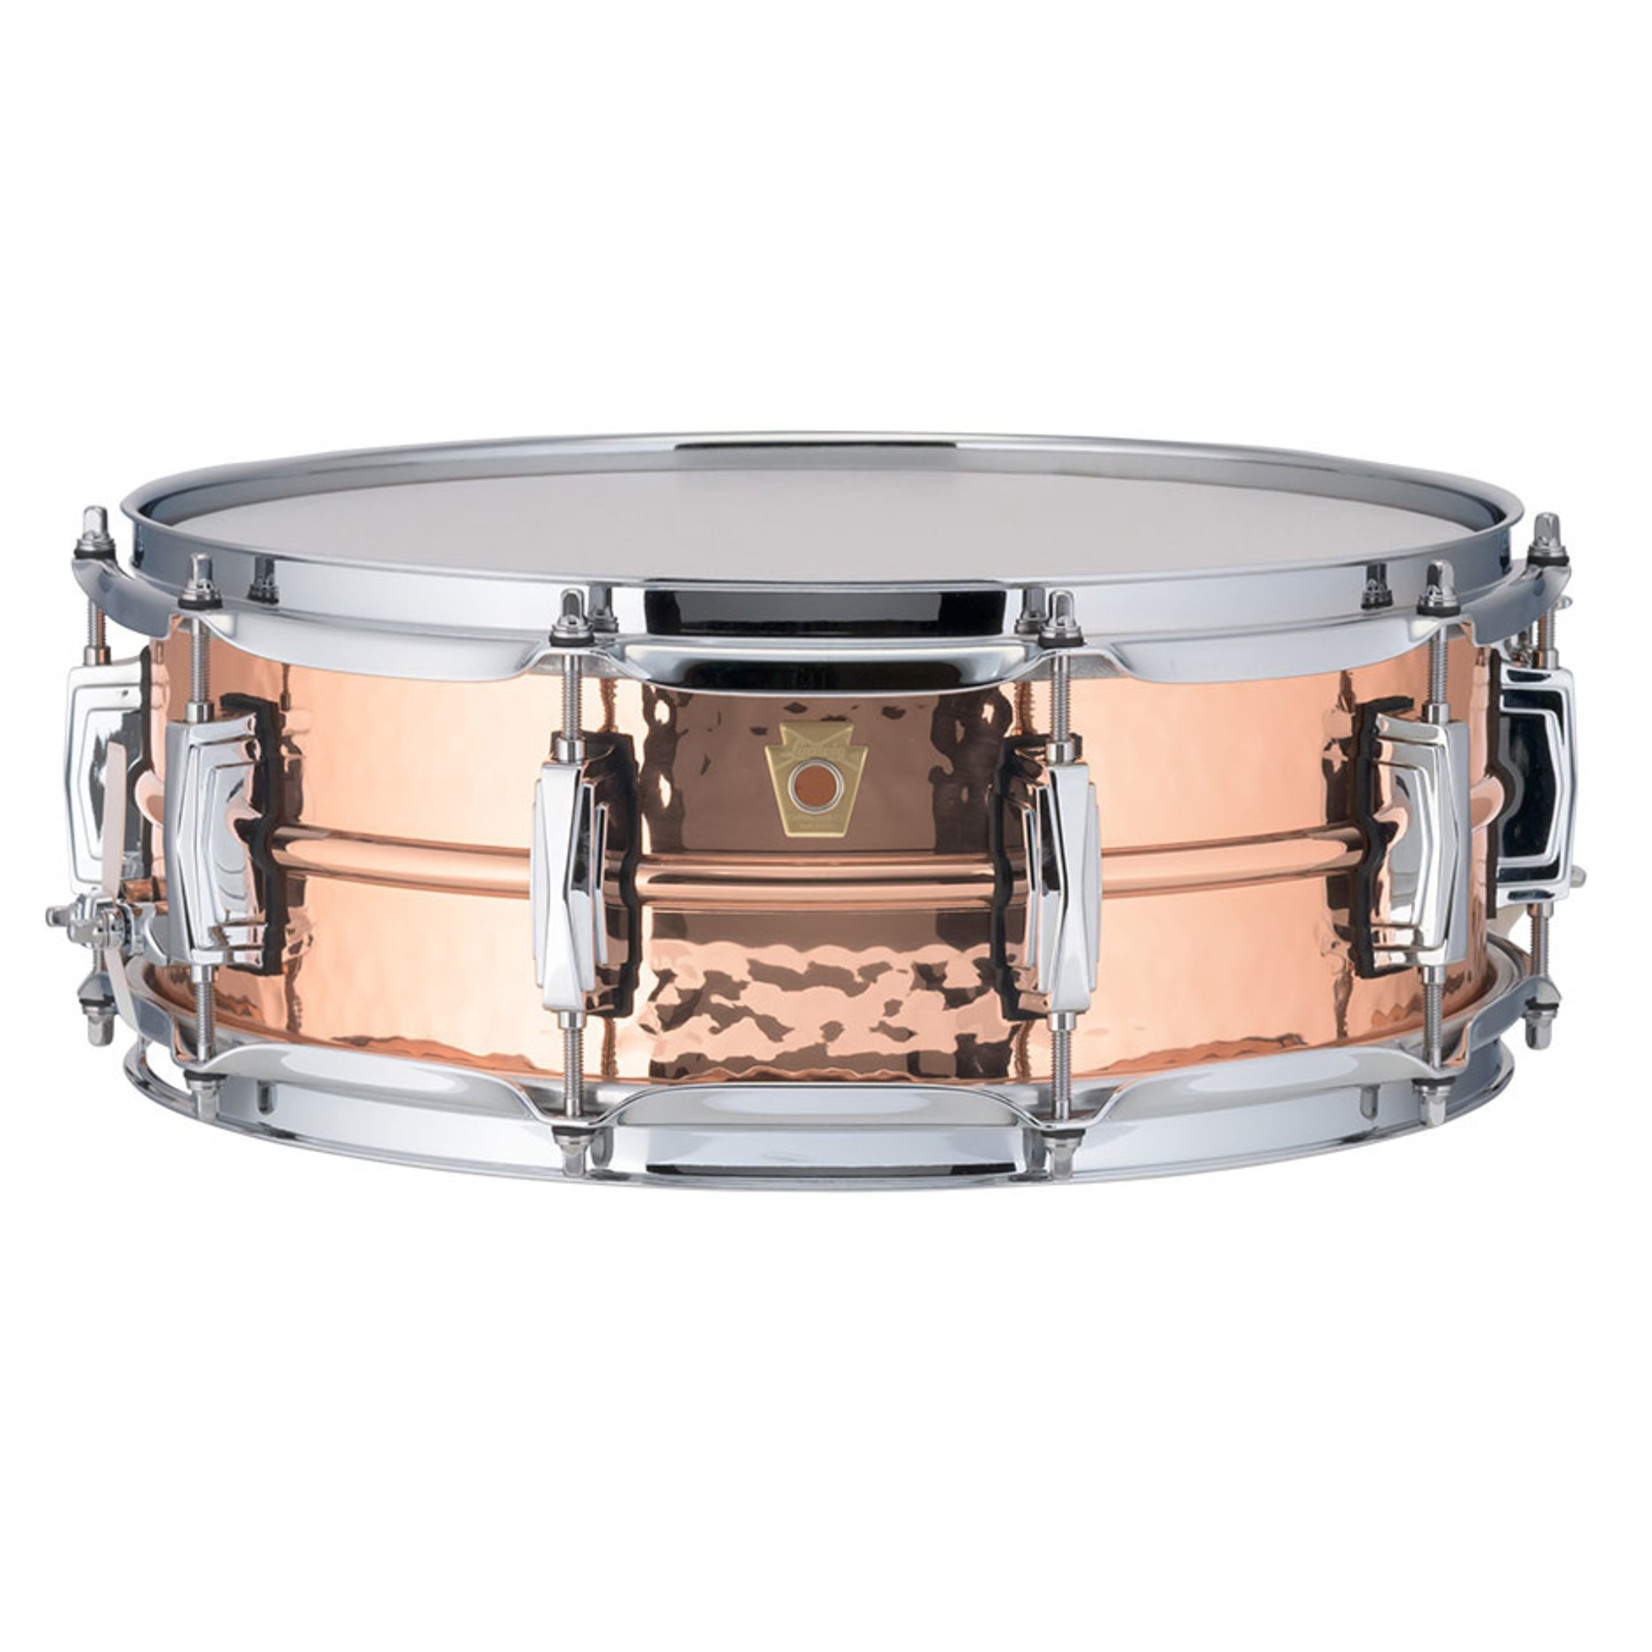 Ludwig Ludwig 5X14 Copper Phonic Snare Drum / Imperial Lugs / Hammered Shell